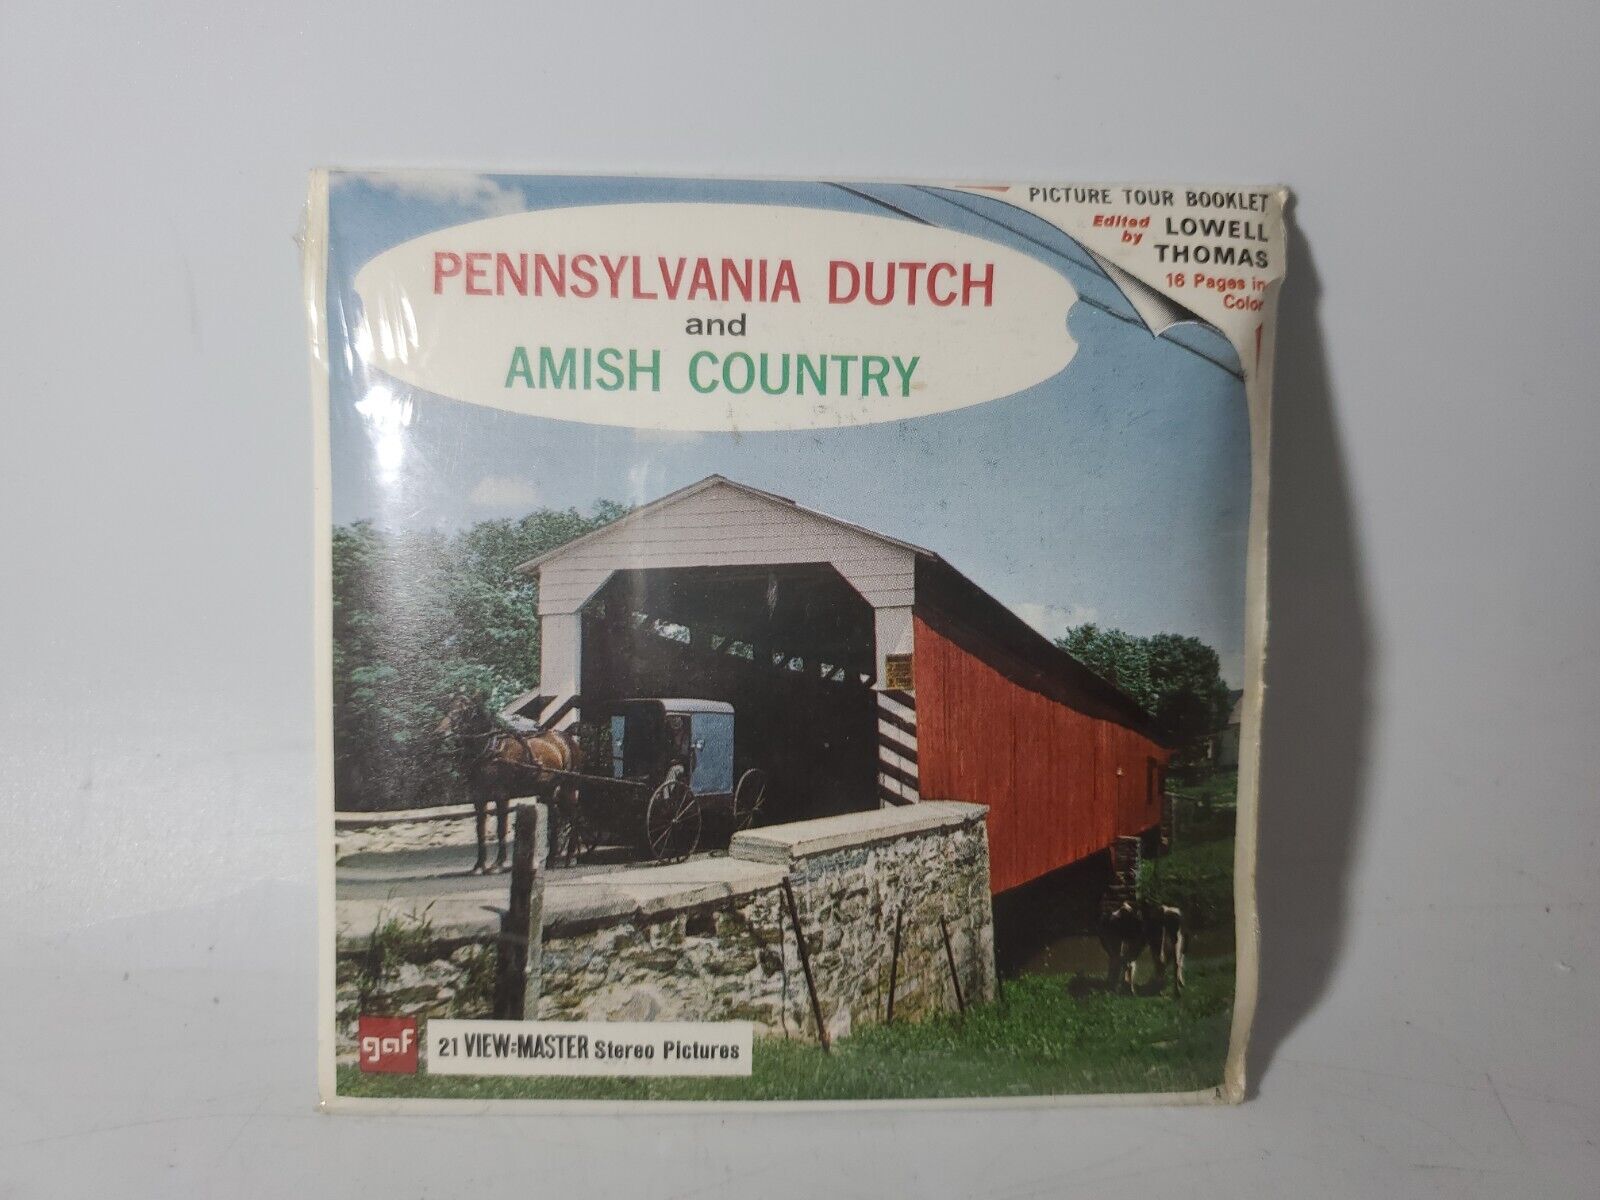 VINTAGE VIEW-MASTER PENNSYLVANIA DUTCH AMISH COUNTRY PICTURES 3 REEL SET 